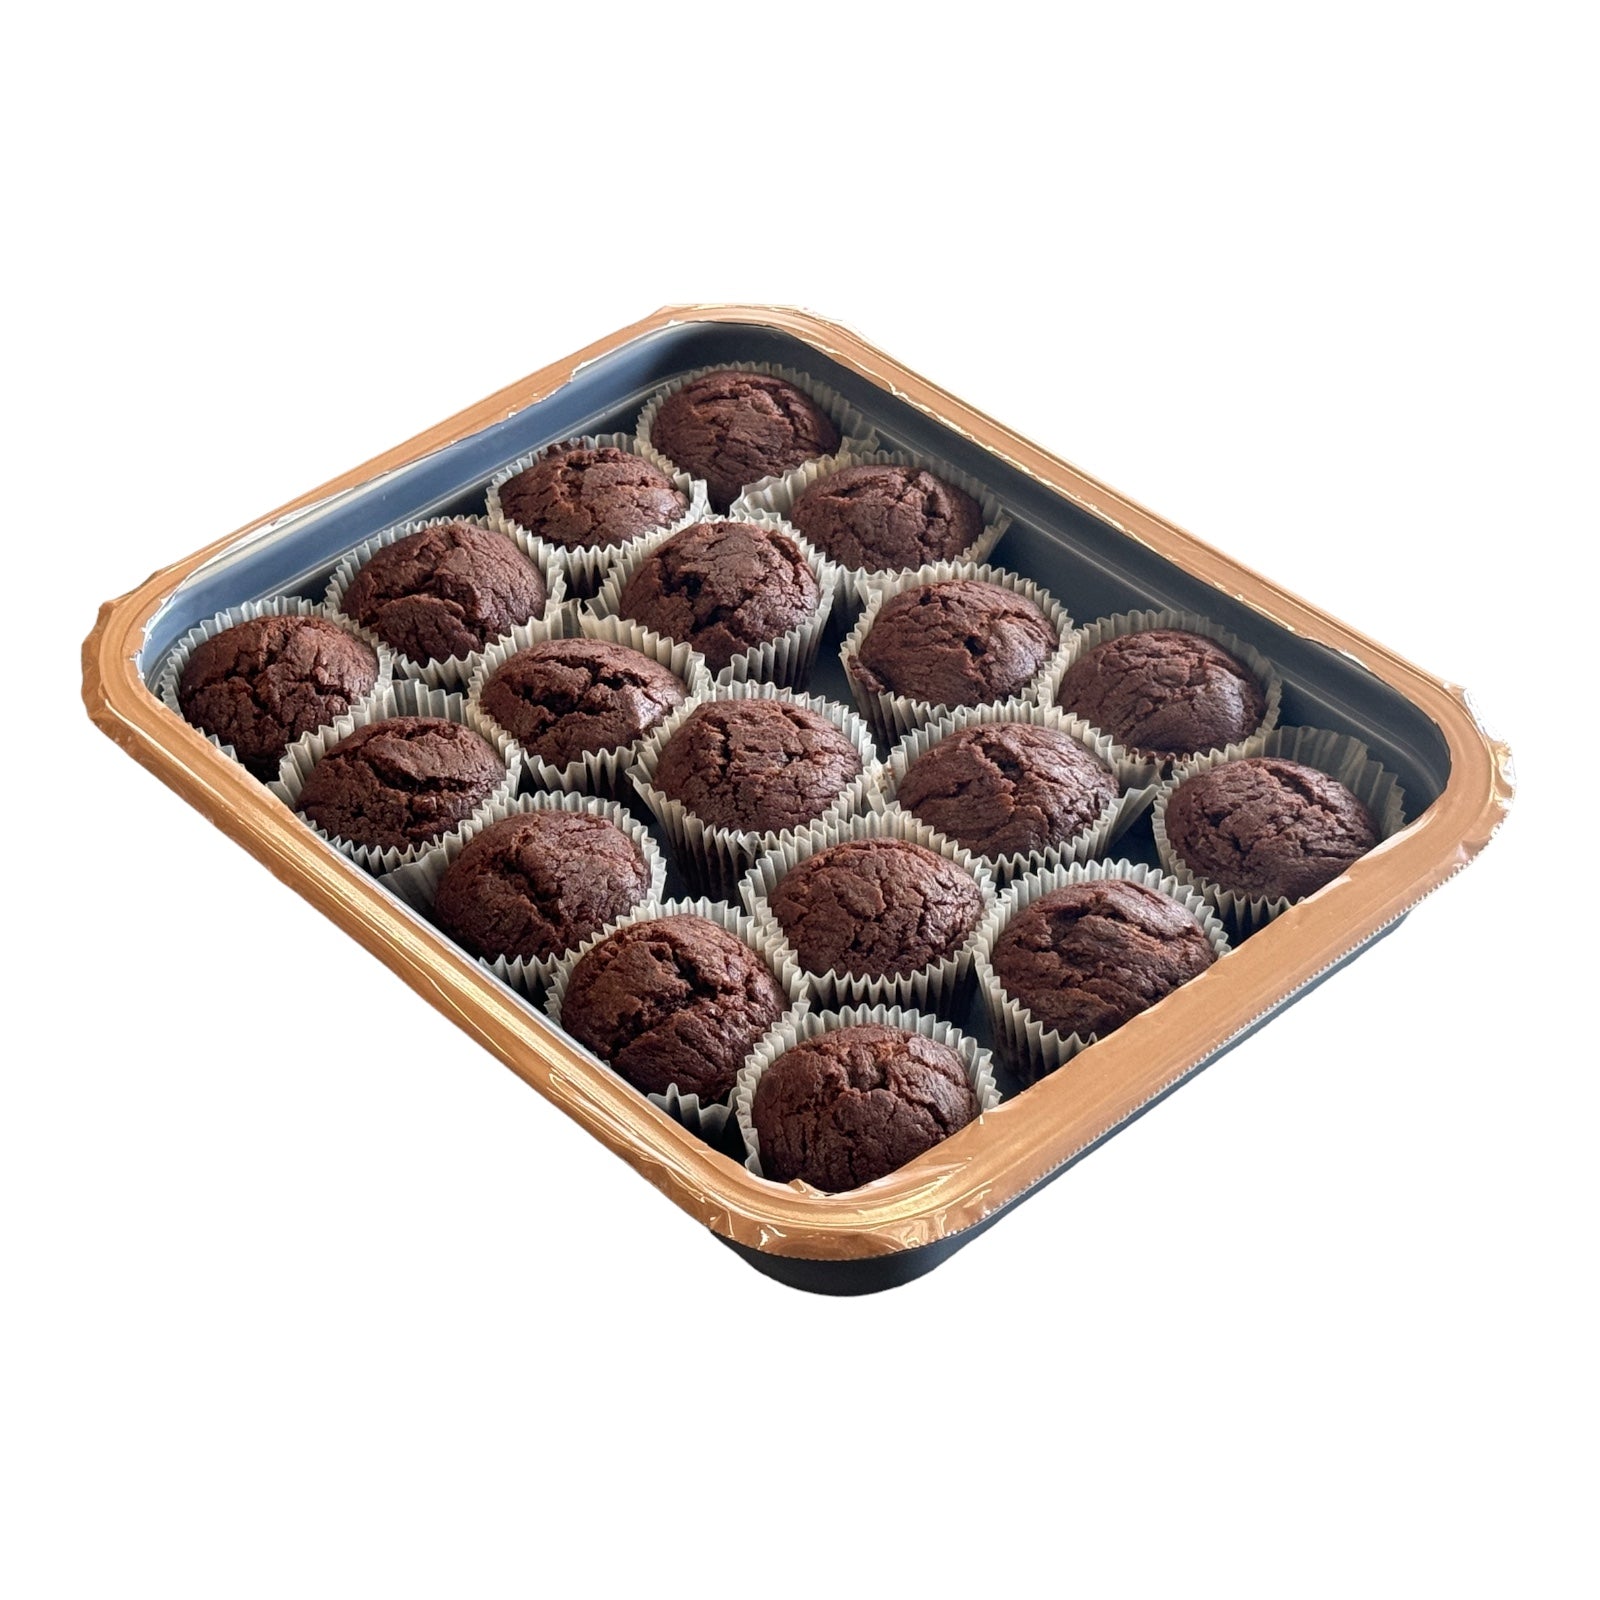 Military MRE Tray Pack, Chocolate Muffin, Ready to Eat.